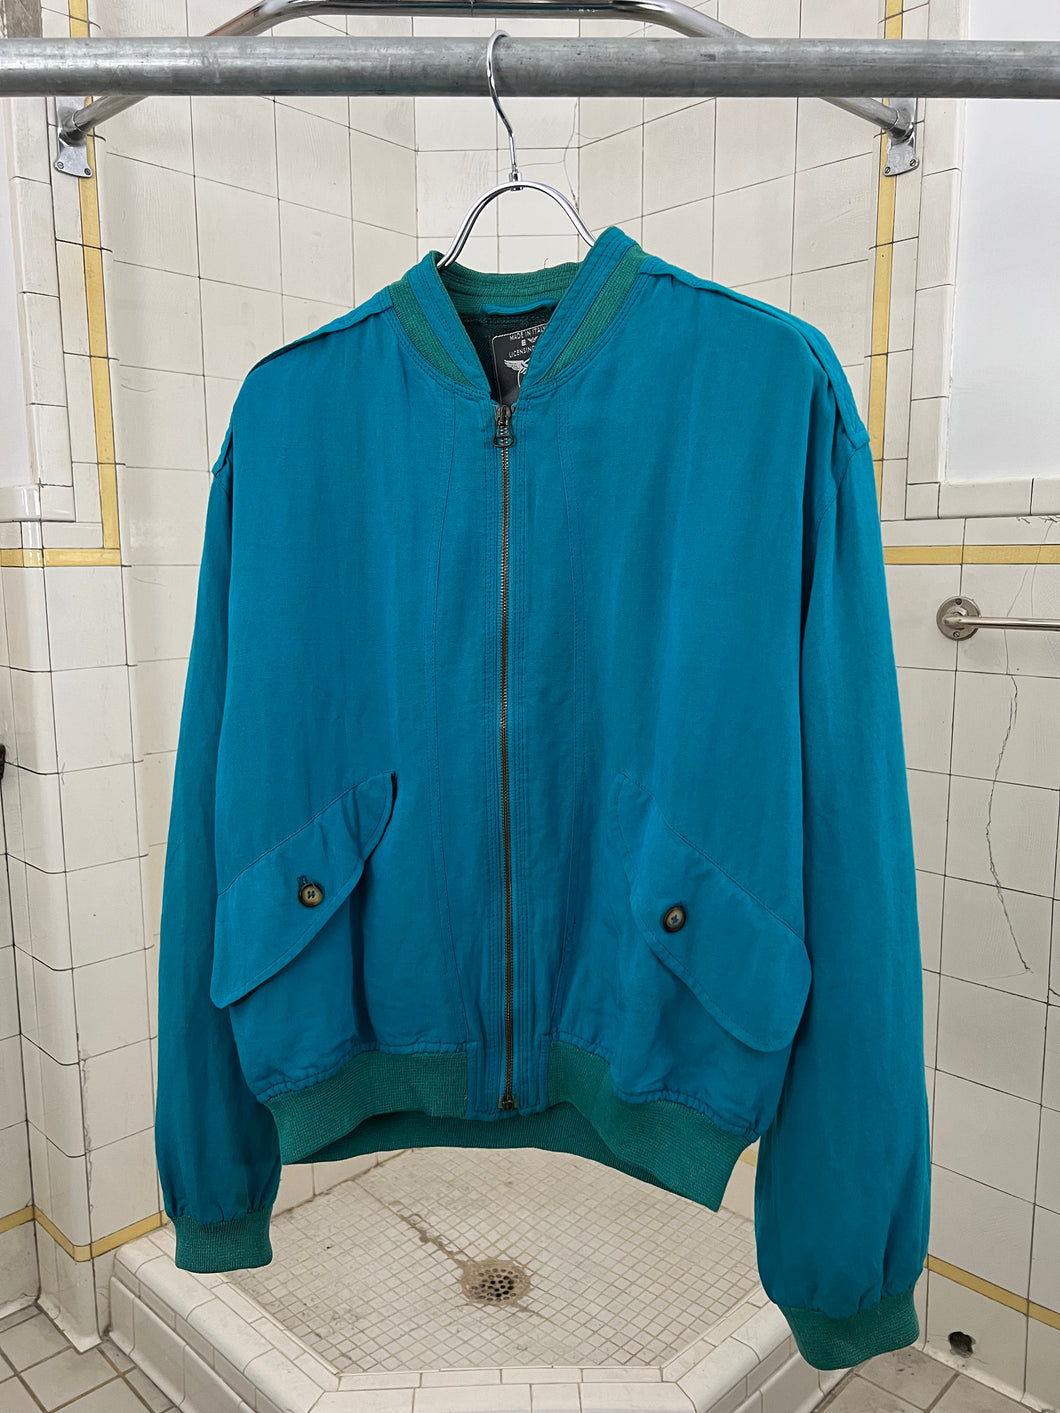 1980s Armani Blue Bomber Jacket with Ribbed Collar Trim - Size M